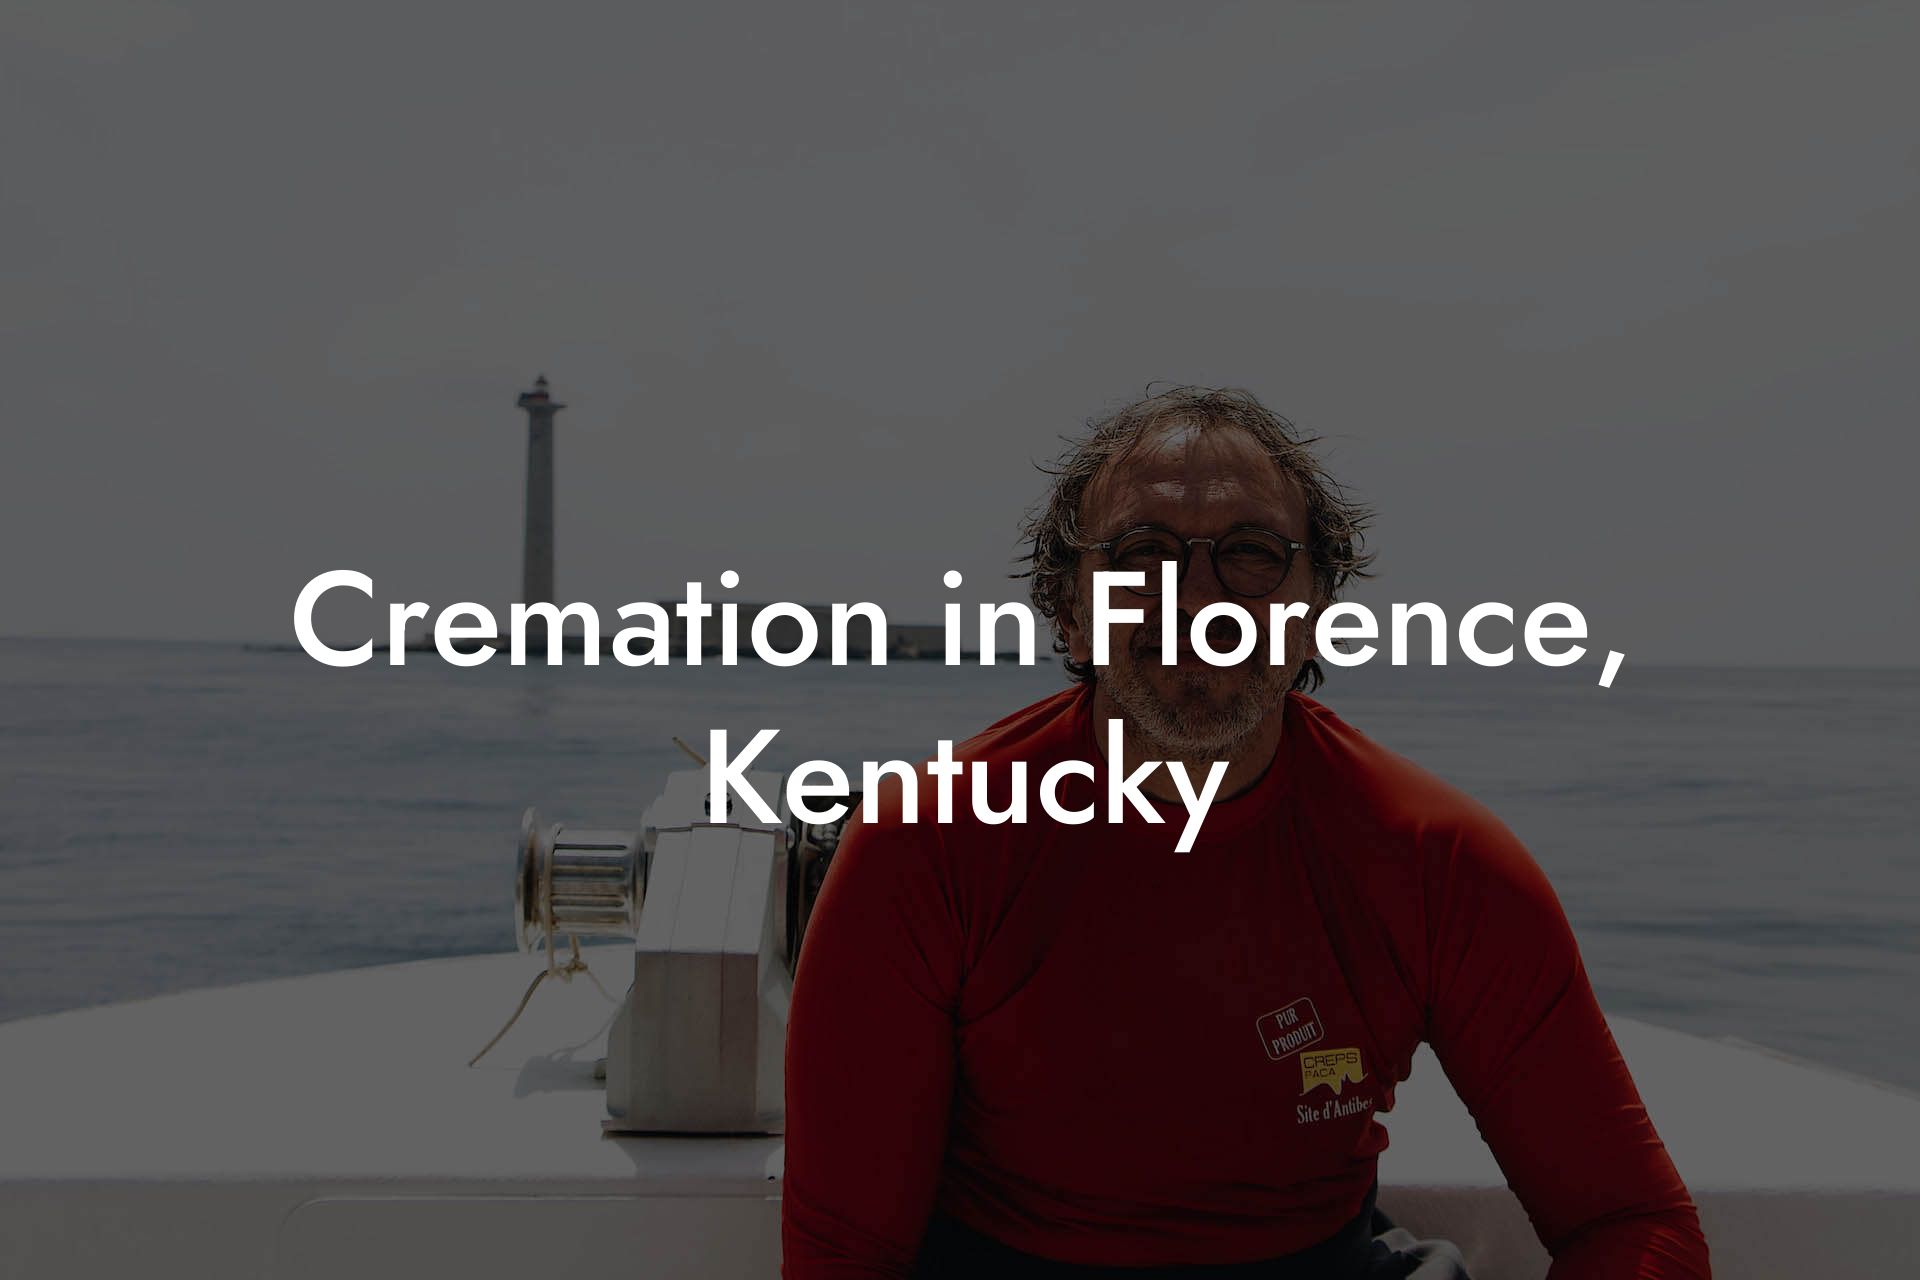 Cremation in Florence, Kentucky